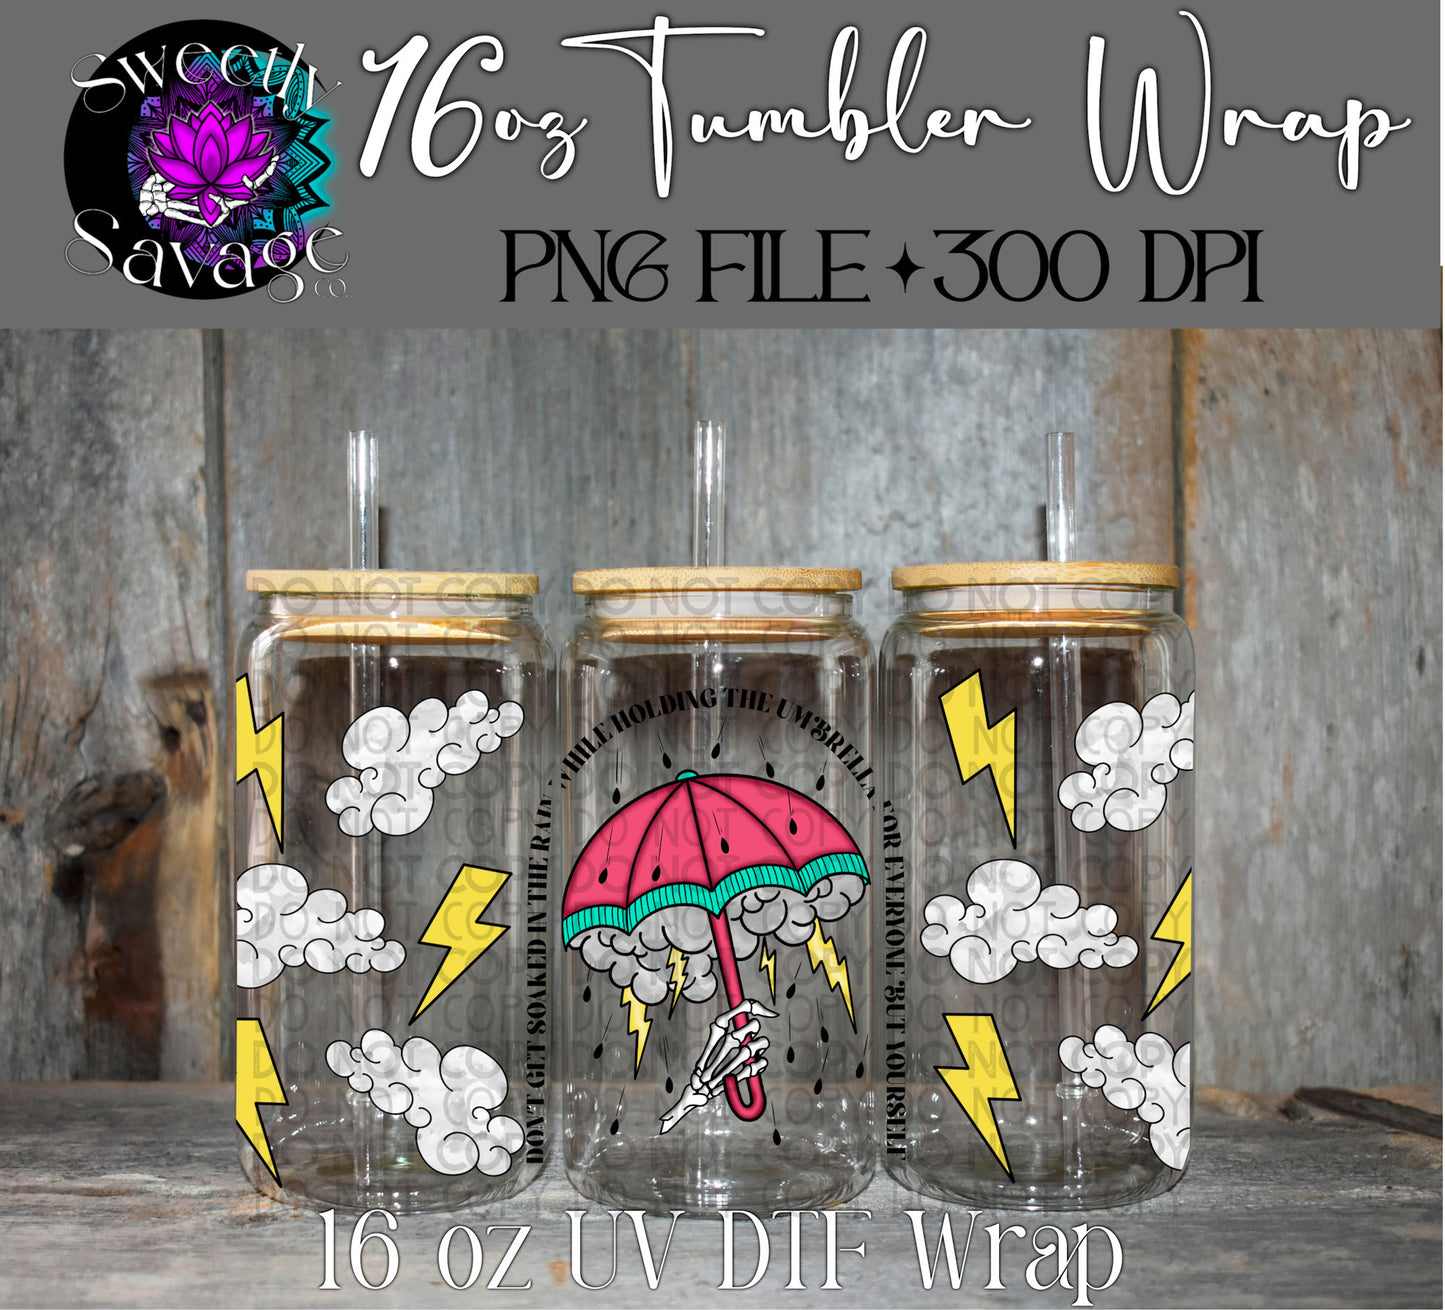 Don’t get soaked in the rain 16oz tumbler wrap